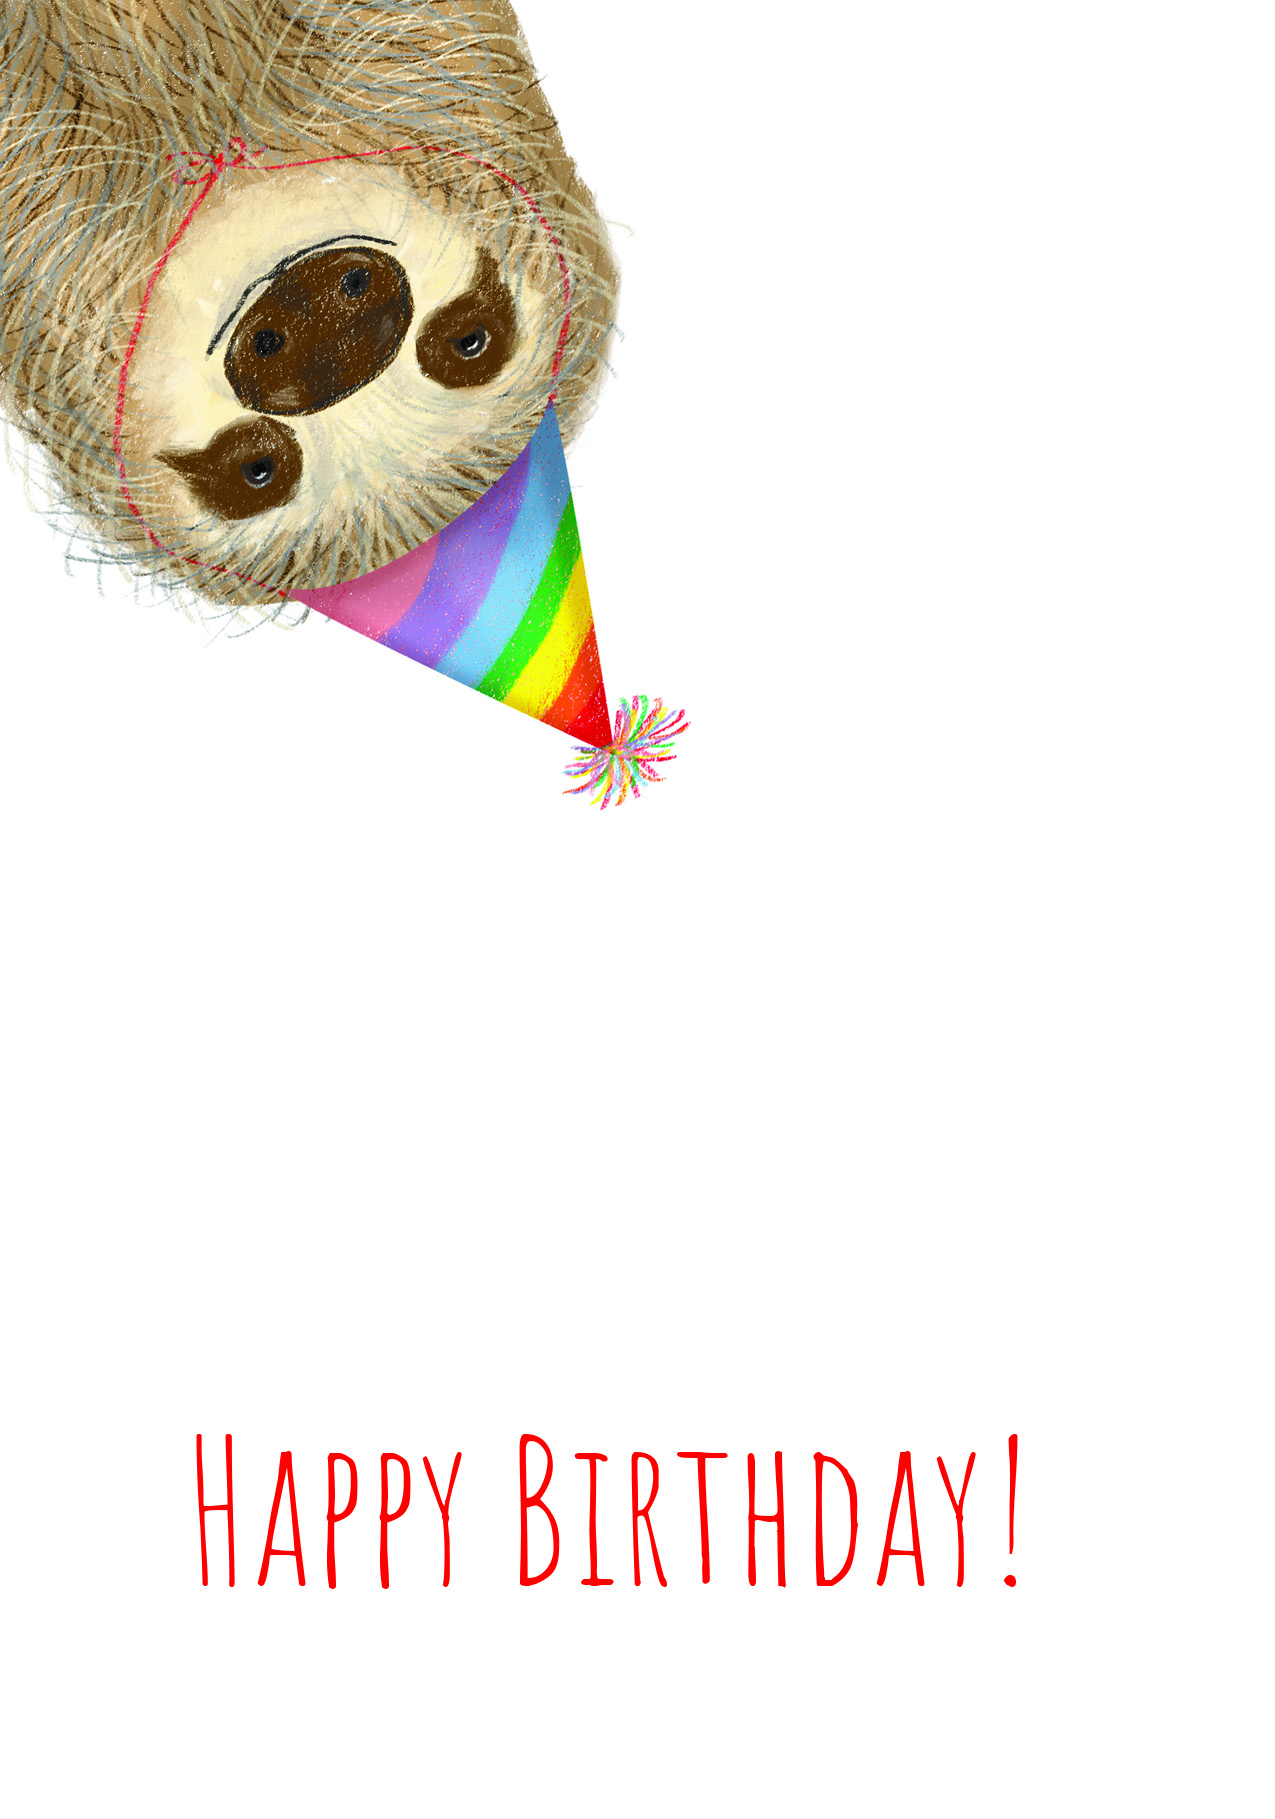 Sloth wearing a party hat, with Happy birthday written below him